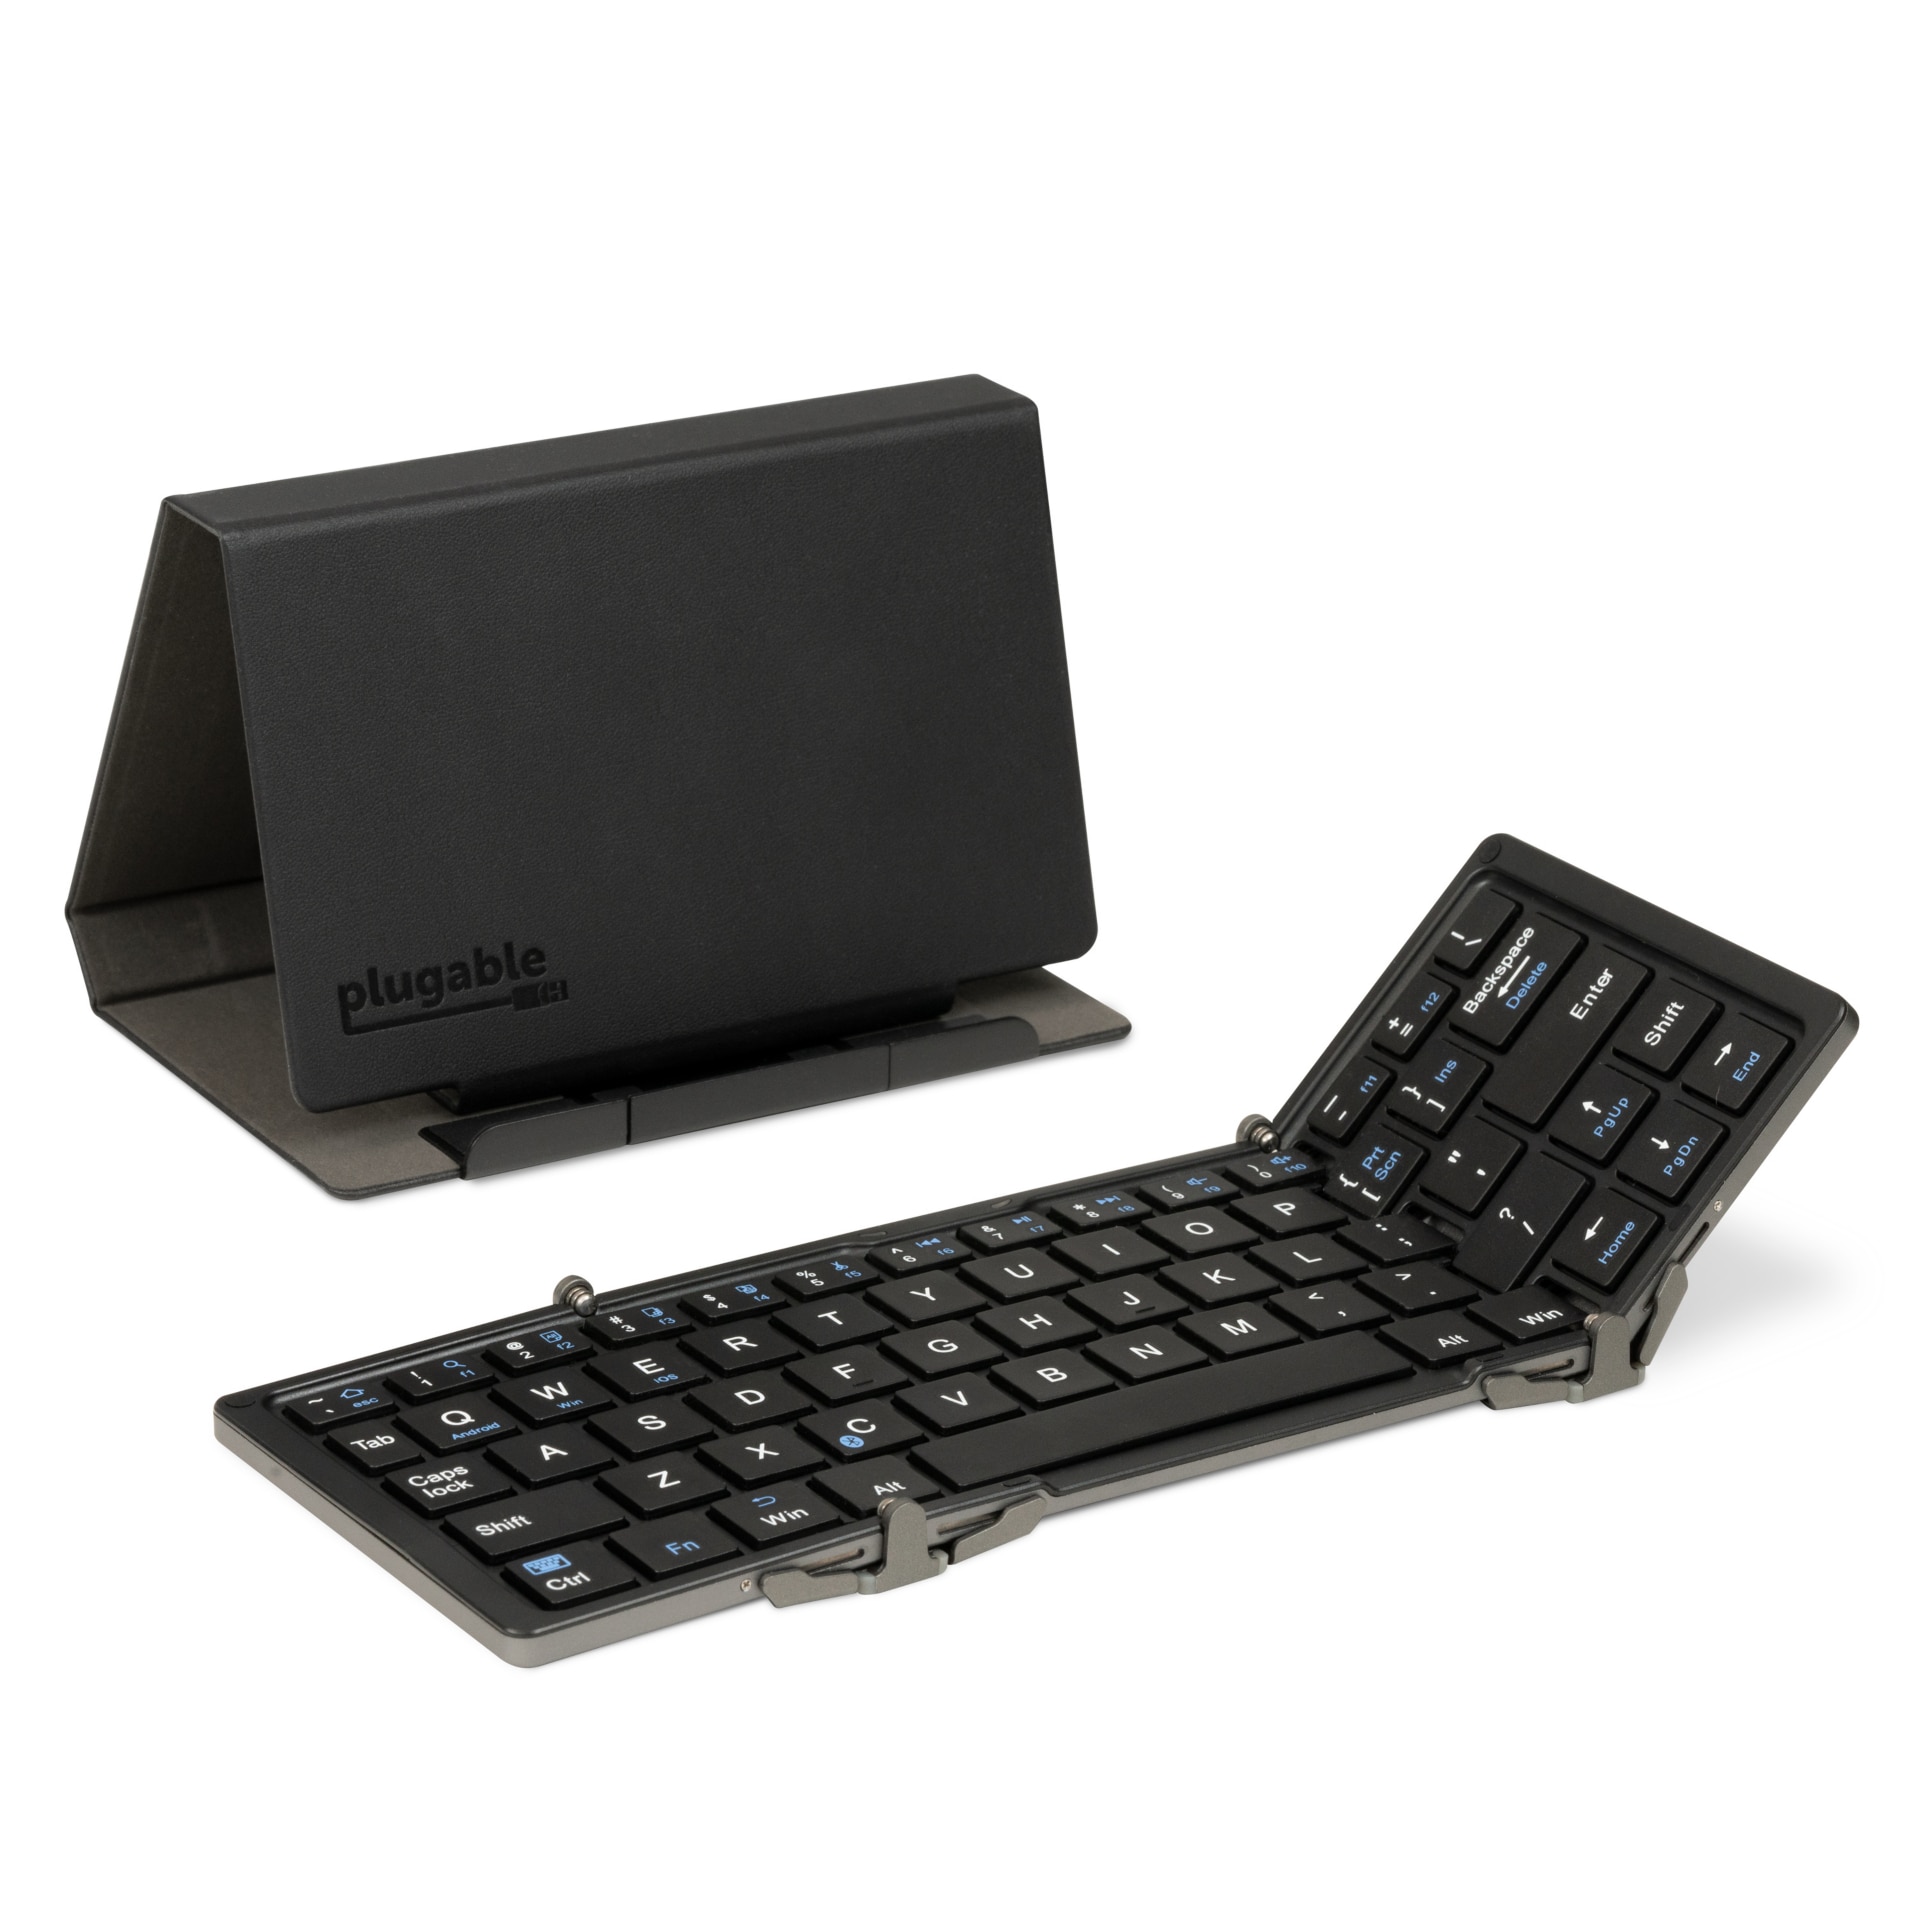 Plugable Foldable Wireless Bluetooth Keyboard Compatible w/ iPad,iPhones,Android,and Windows,Compact and Portable